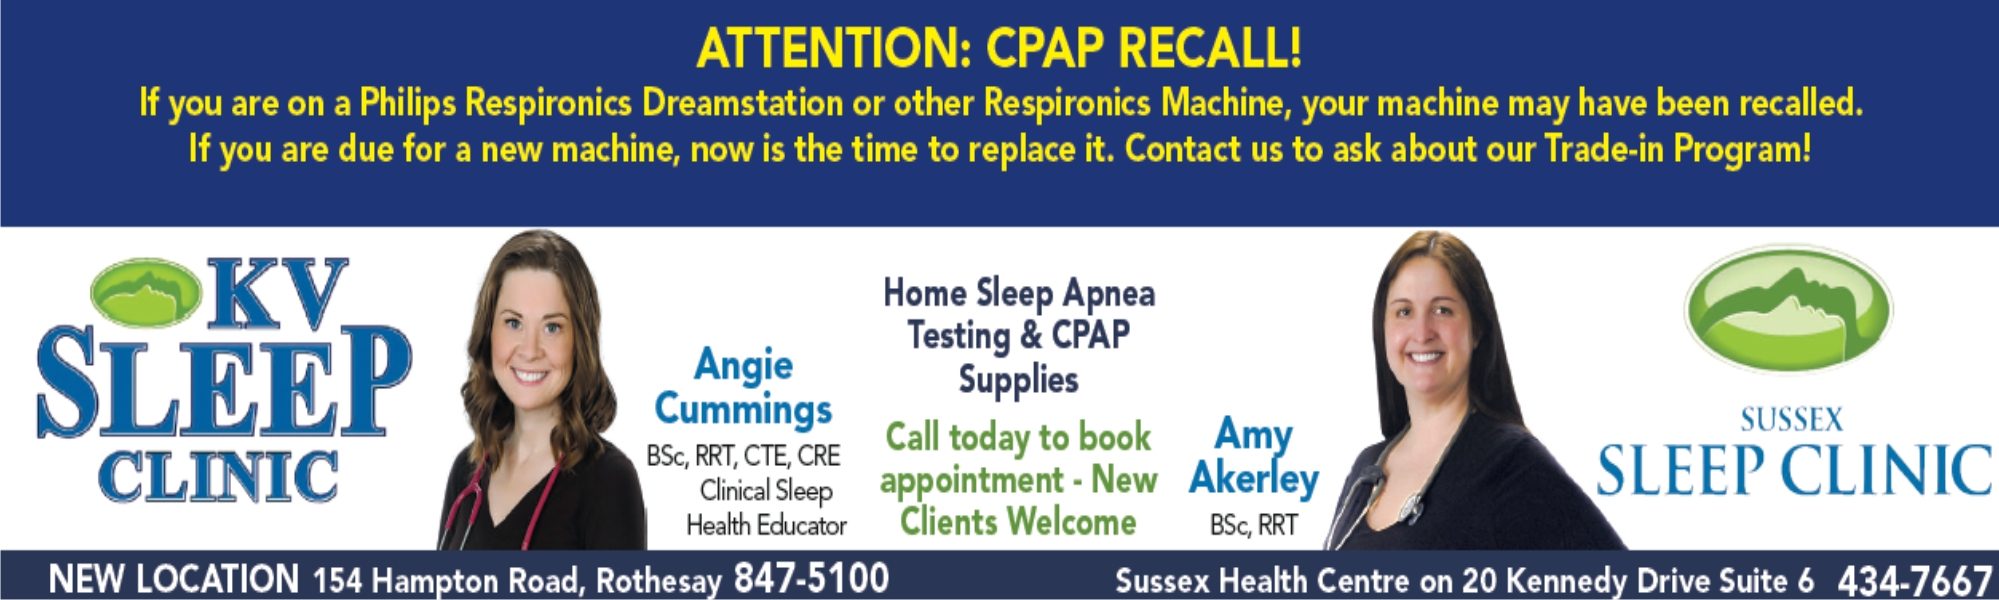 cpap recall